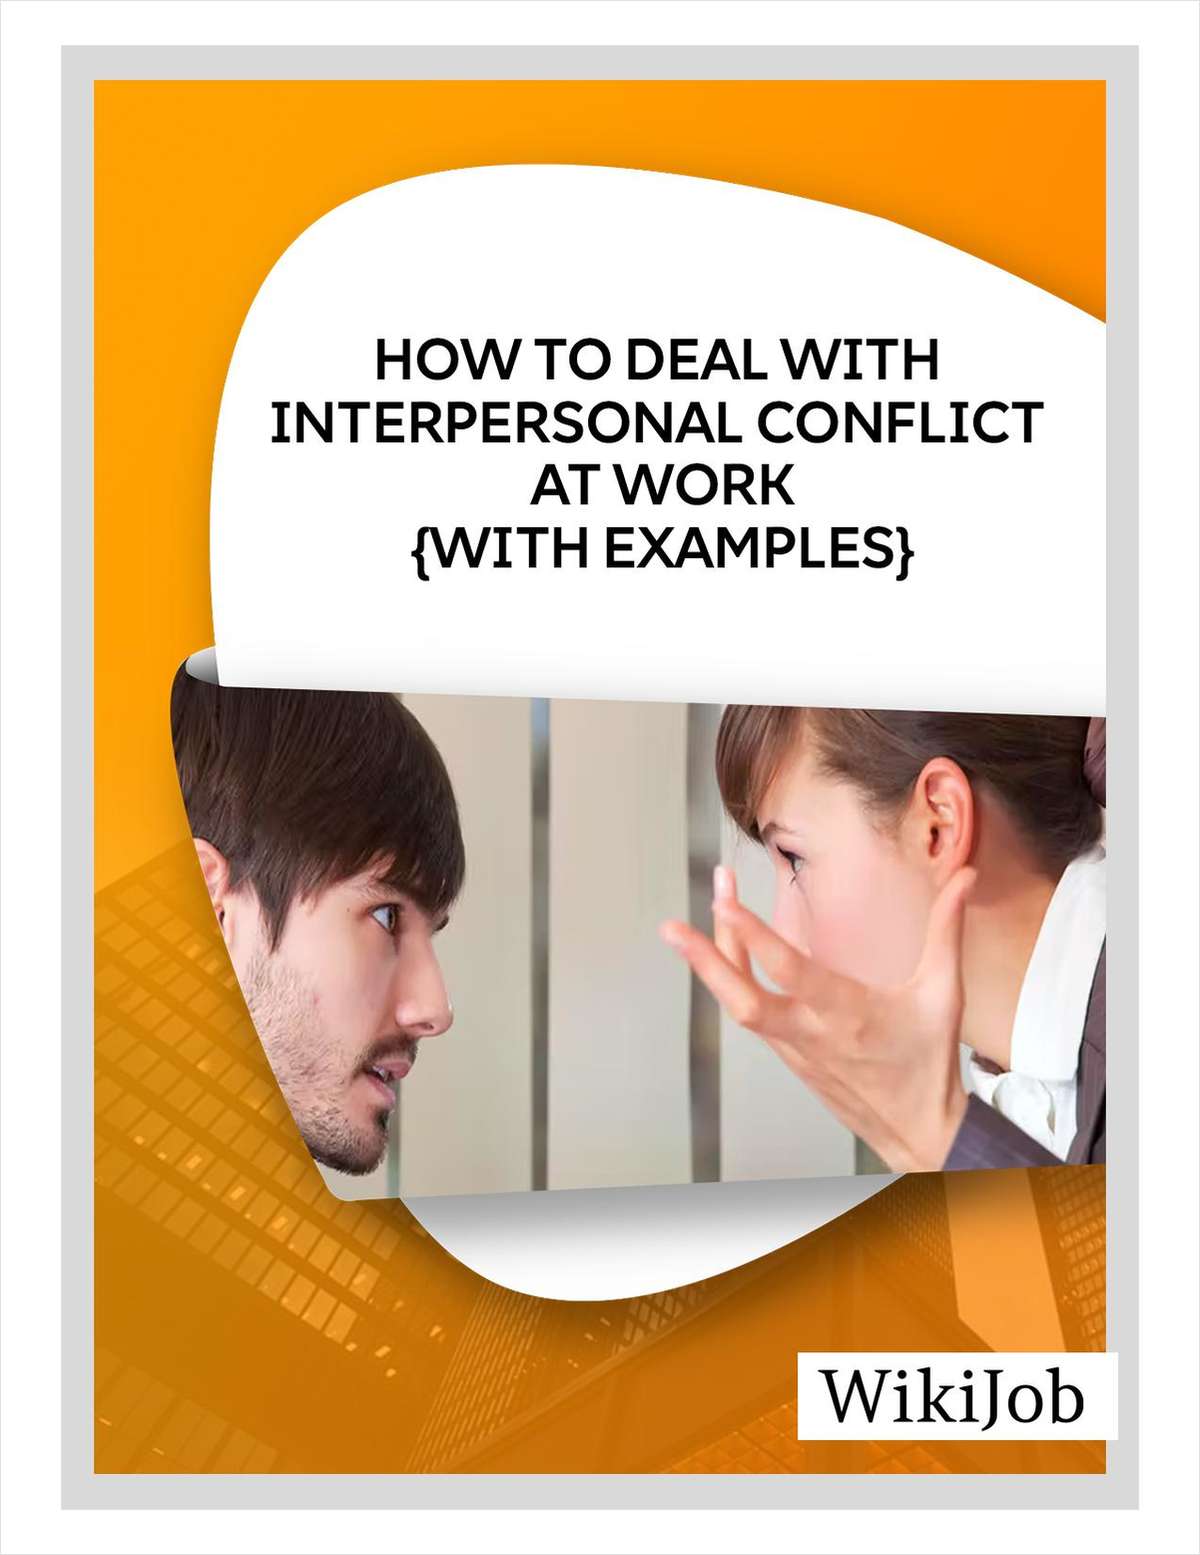 How to Deal With Interpersonal Conflict at Work